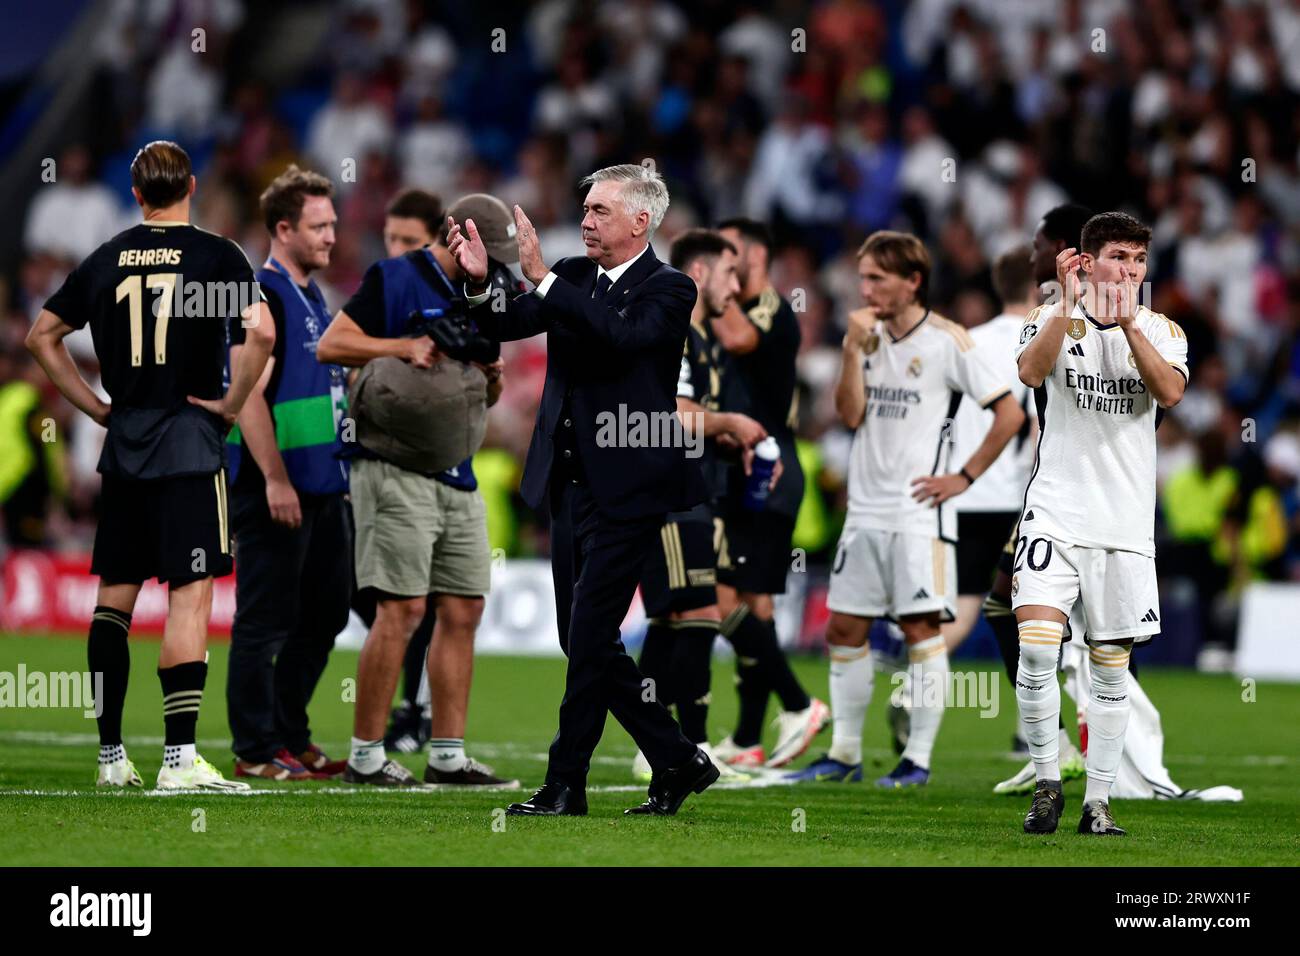 Real Madrid held by Sevilla as Ancelotti fumes